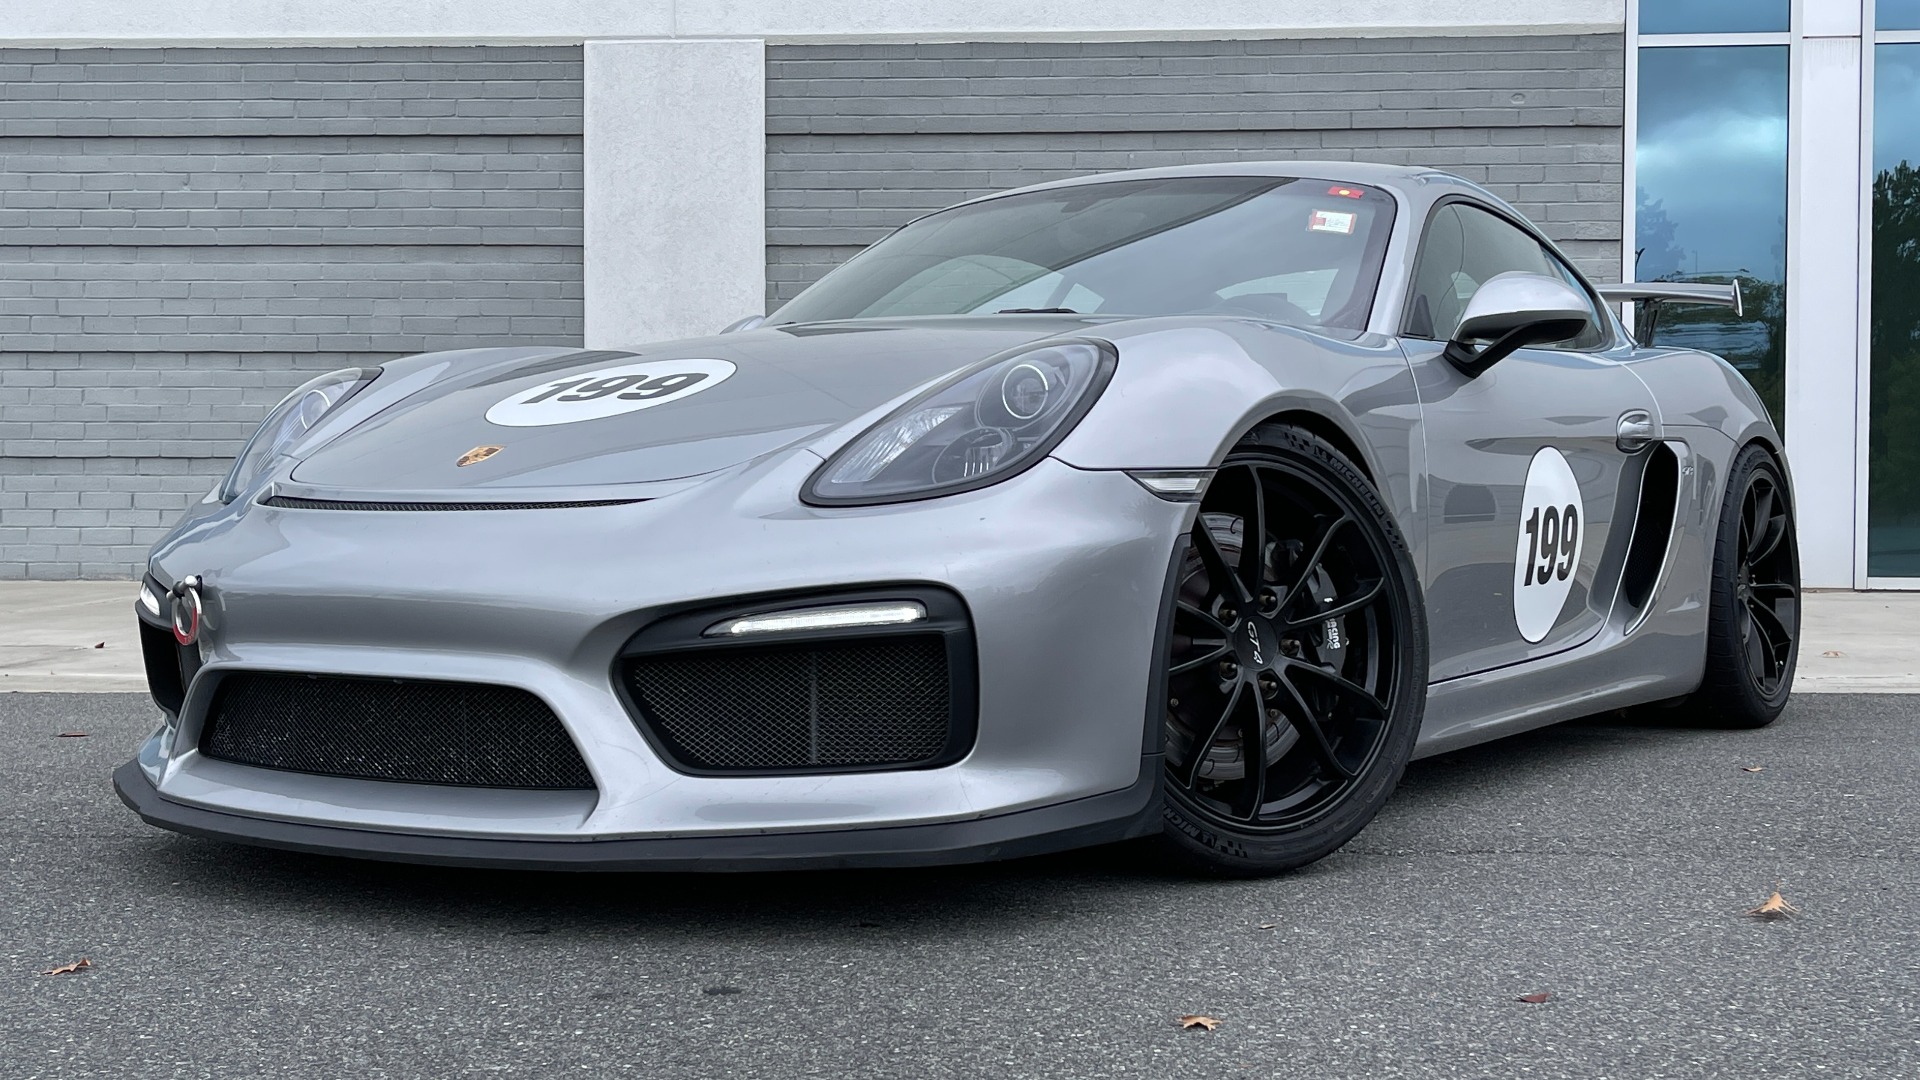 Used 2016 Porsche CAYMAN GT4 2DR COUPE / 3.8L / 6-SPD MAN / SPORT CHRONO / TRACK PREP for sale Sold at Formula Imports in Charlotte NC 28227 2